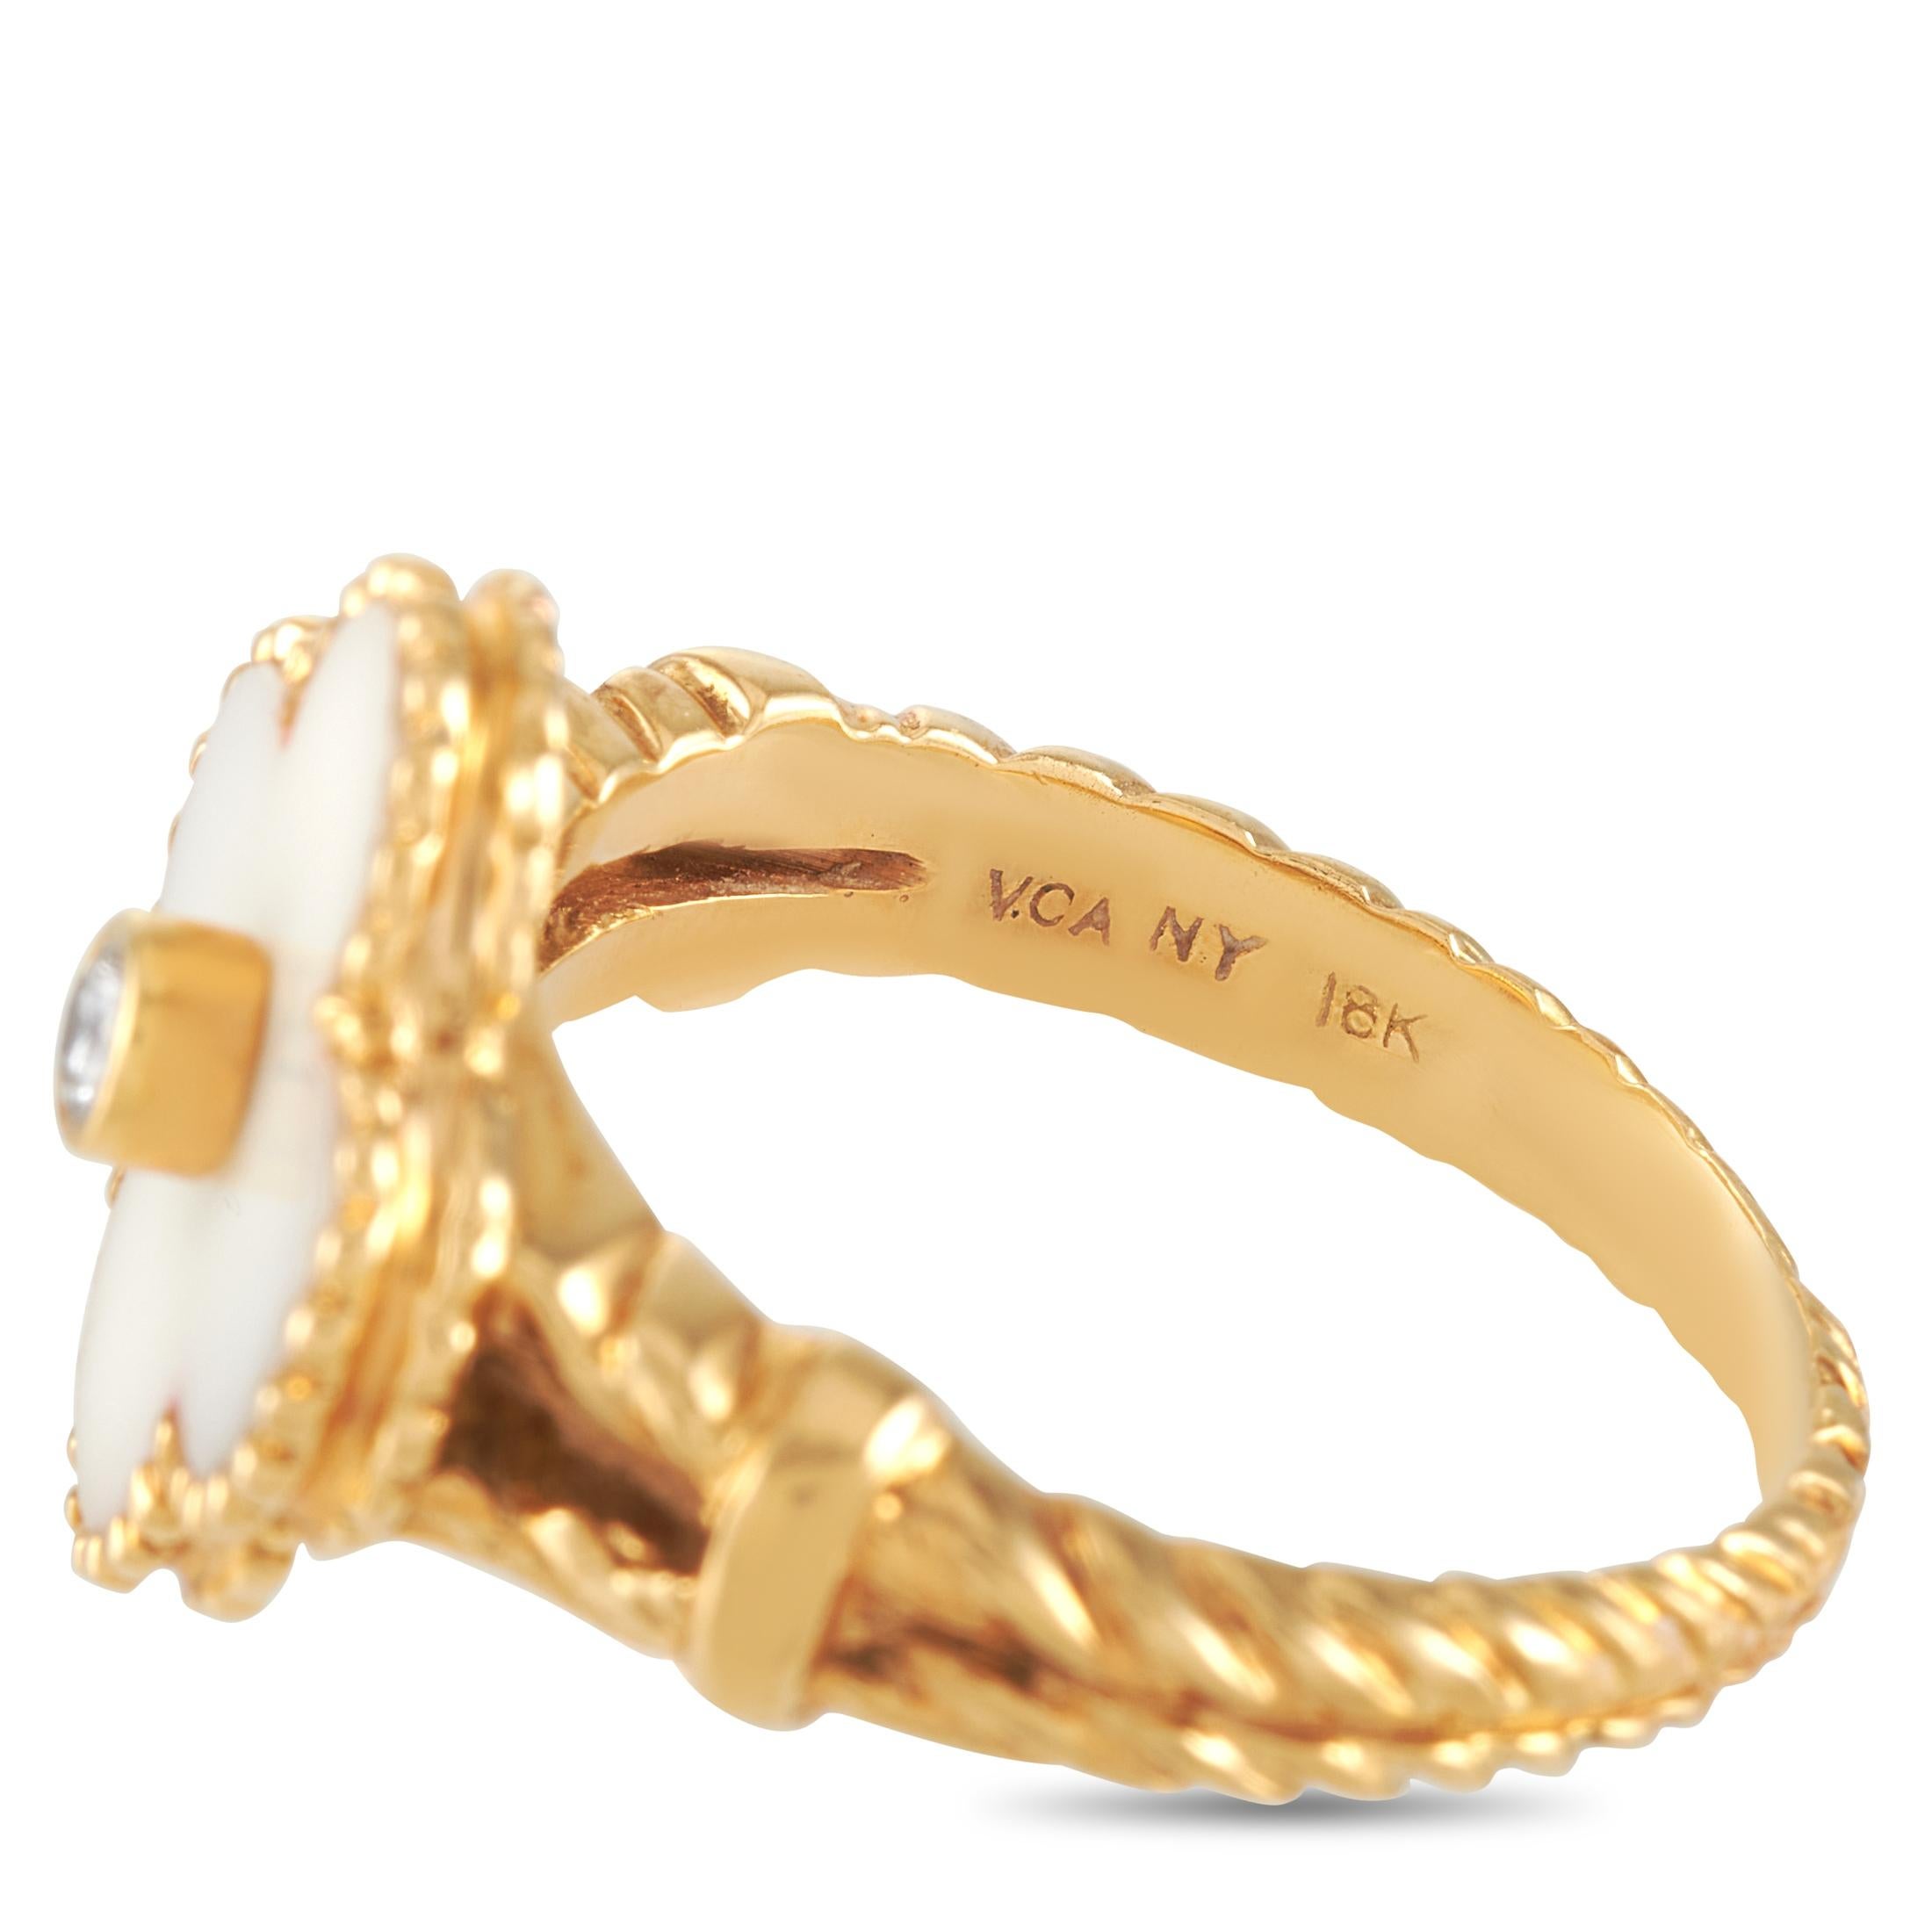 Women's Van Cleef & Arpels Vintage Alhambra 18K Yellow Gold Diamond and White Coral Ring